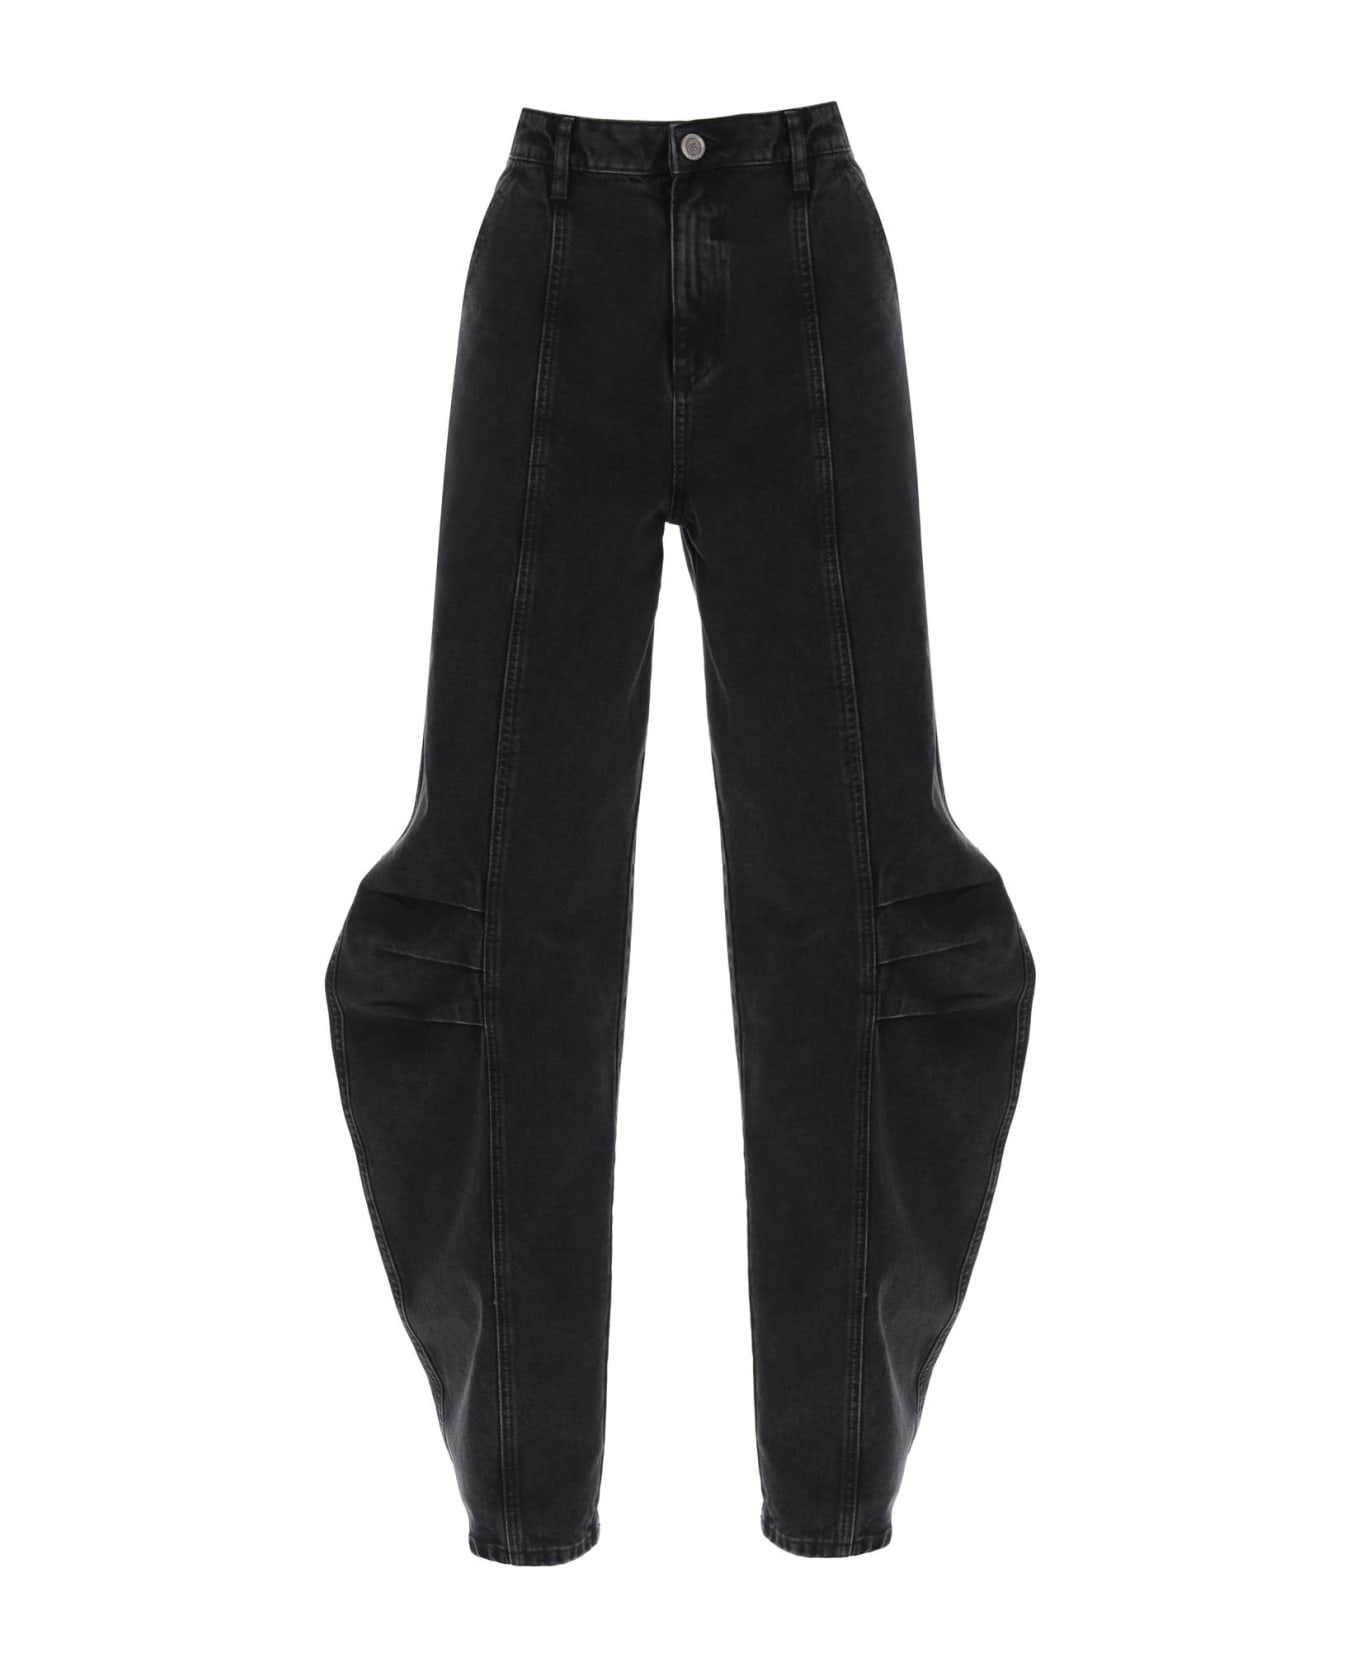 Rotate by Birger Christensen Baggy Jeans With Curved Leg - BLACK WASHED (Black)